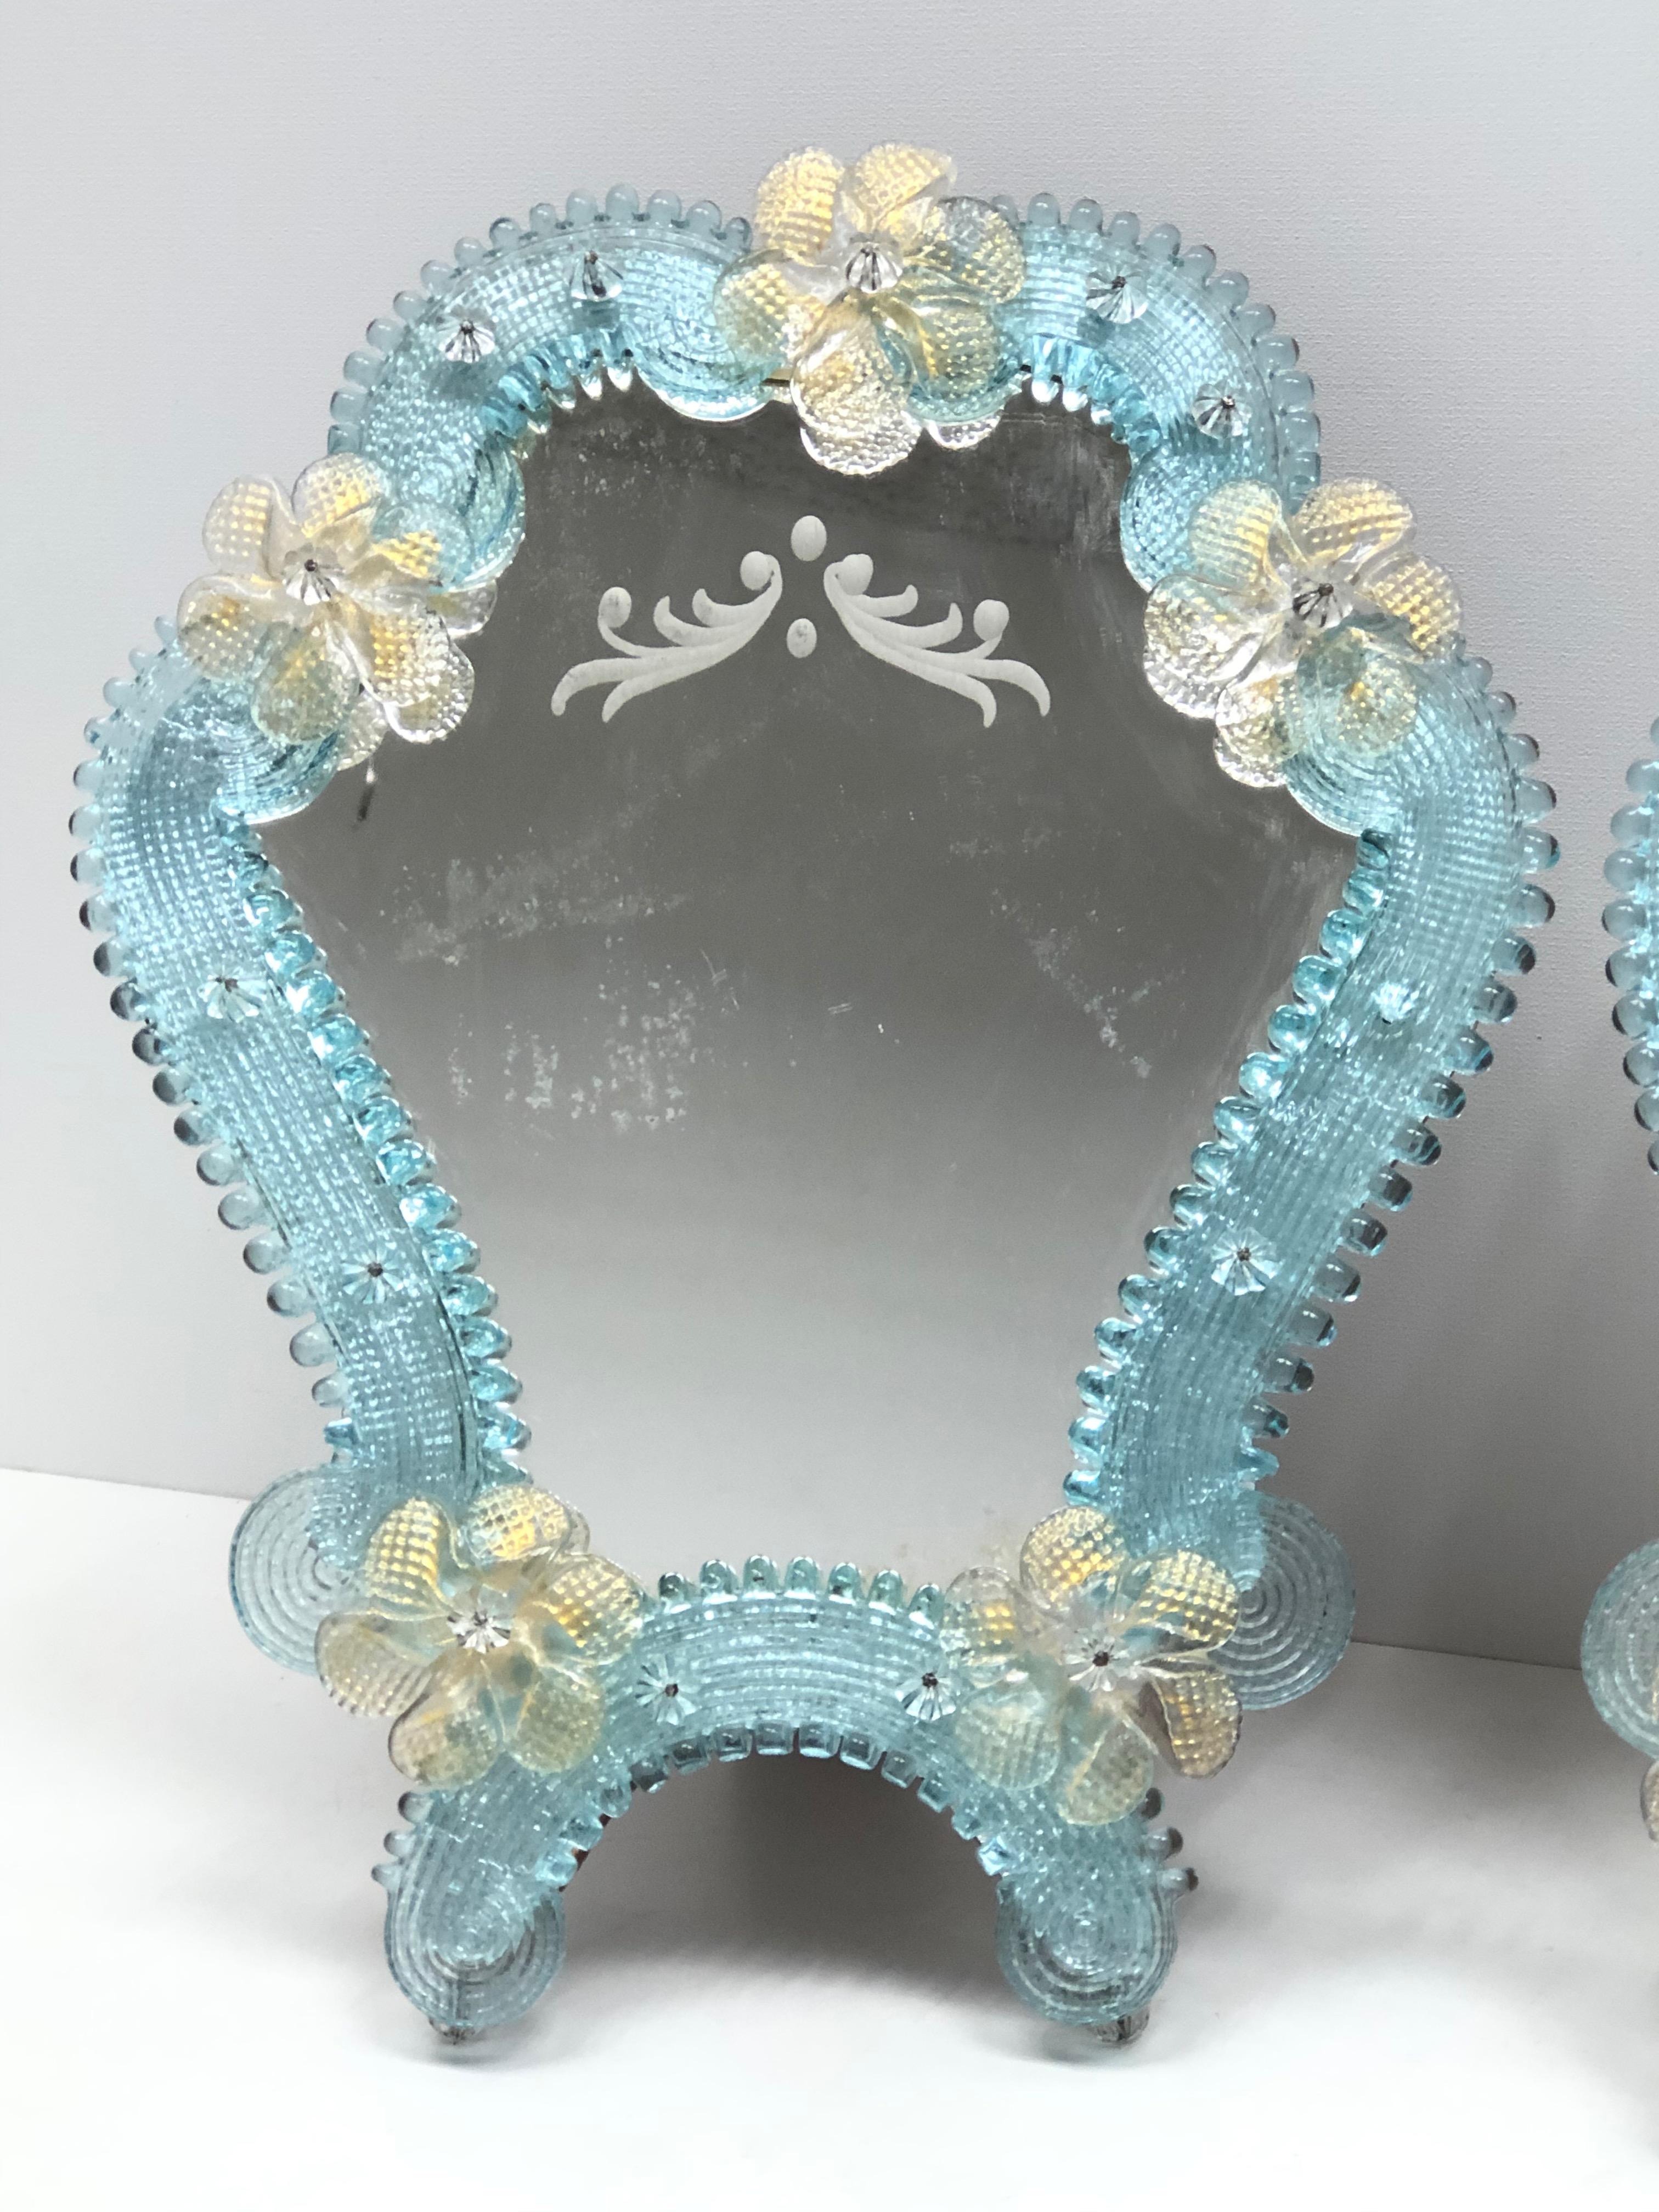 A pair gorgeous Murano glass vanity mirrors surrounded with handmade light blue glass parts and clear and golden colored flowers. Can be used as a table or a wall mirror. With minor signs of wear as expected with age and use. A nice addition to any